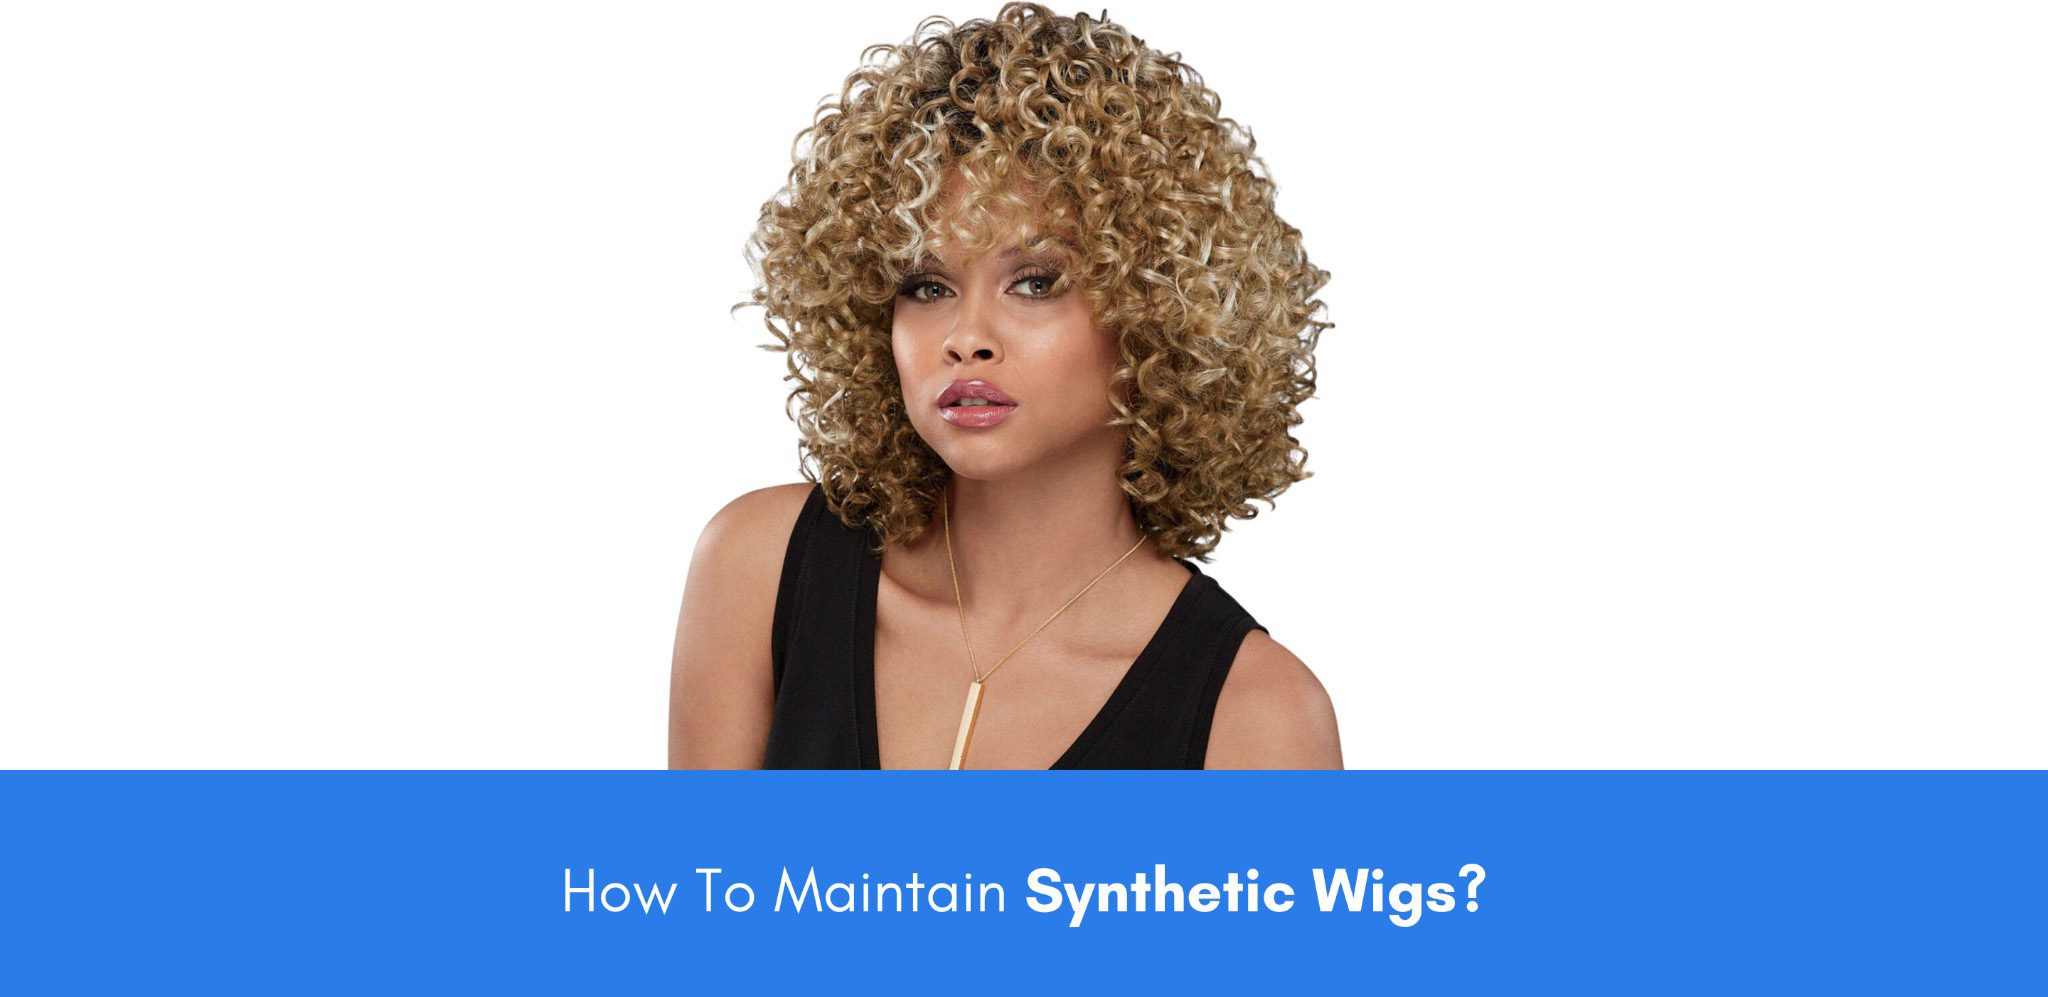 How To Maintain Synthetic Wigs?